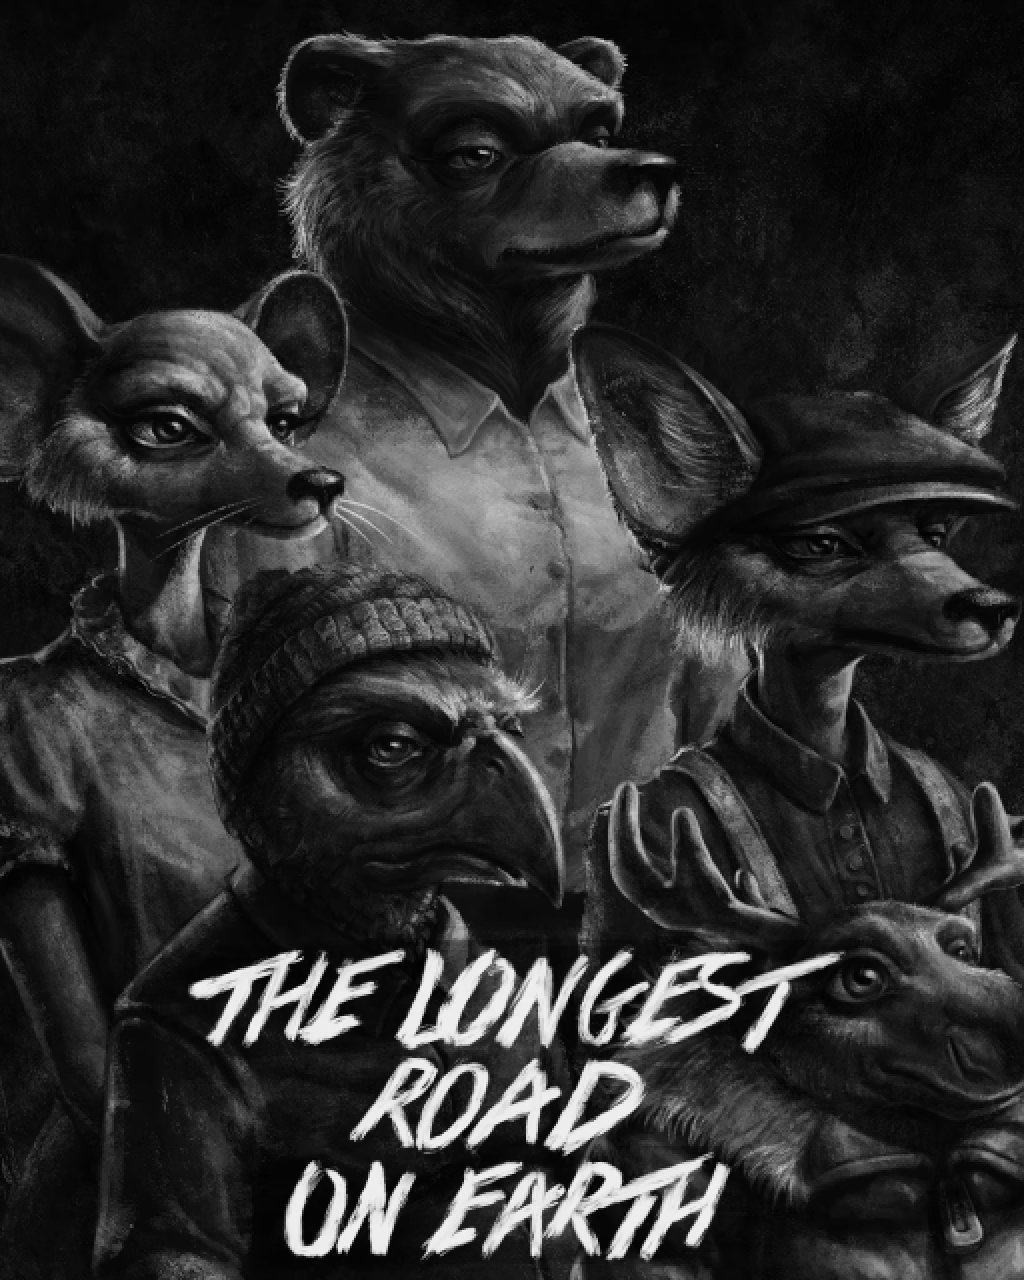 The Longest Road on Earth